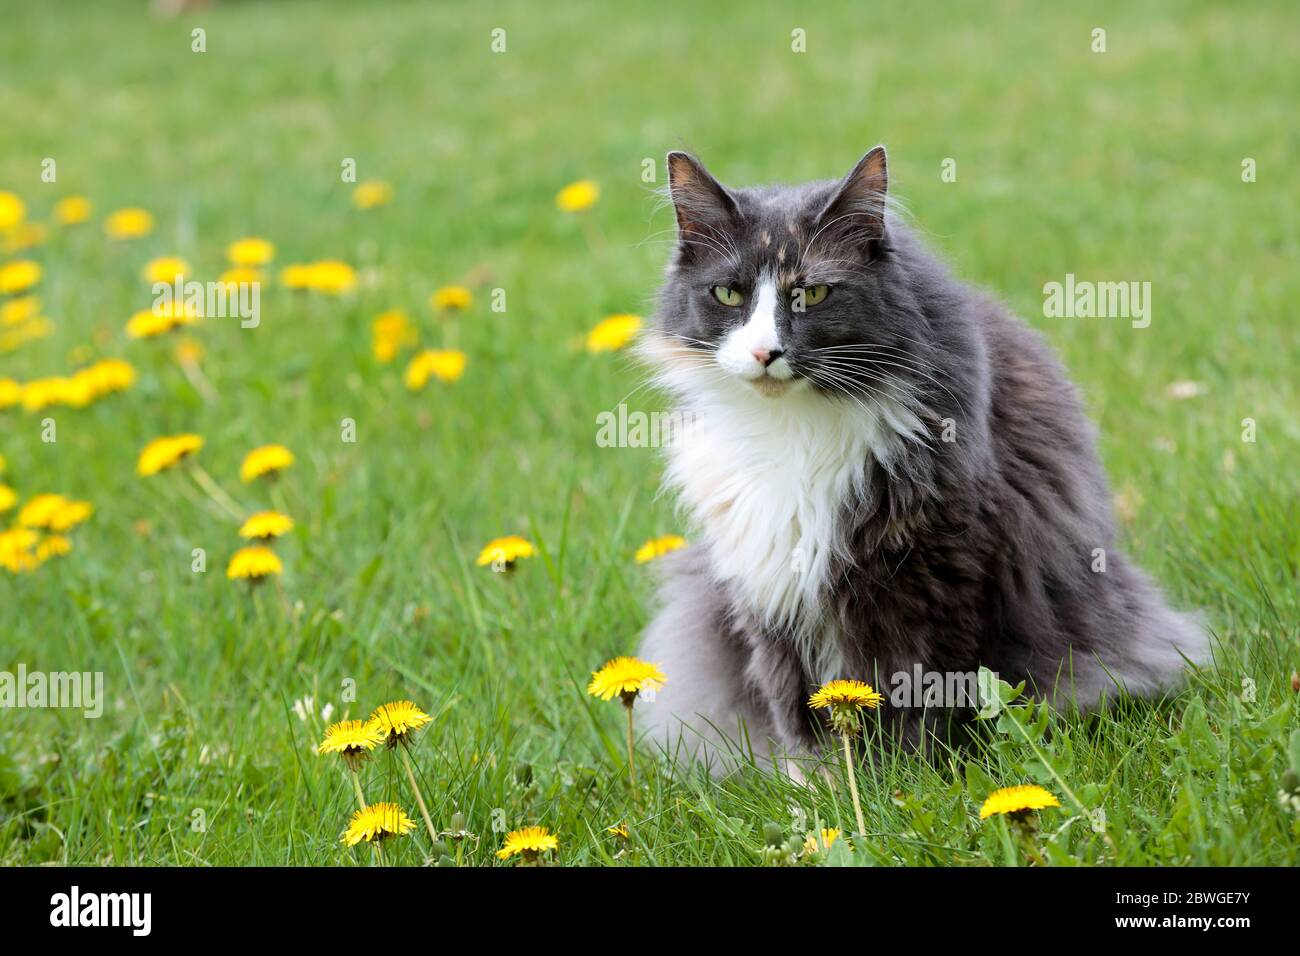 A beautiful norwegian forest cat female sitting outdoors with blooming dandelions Stock Photo